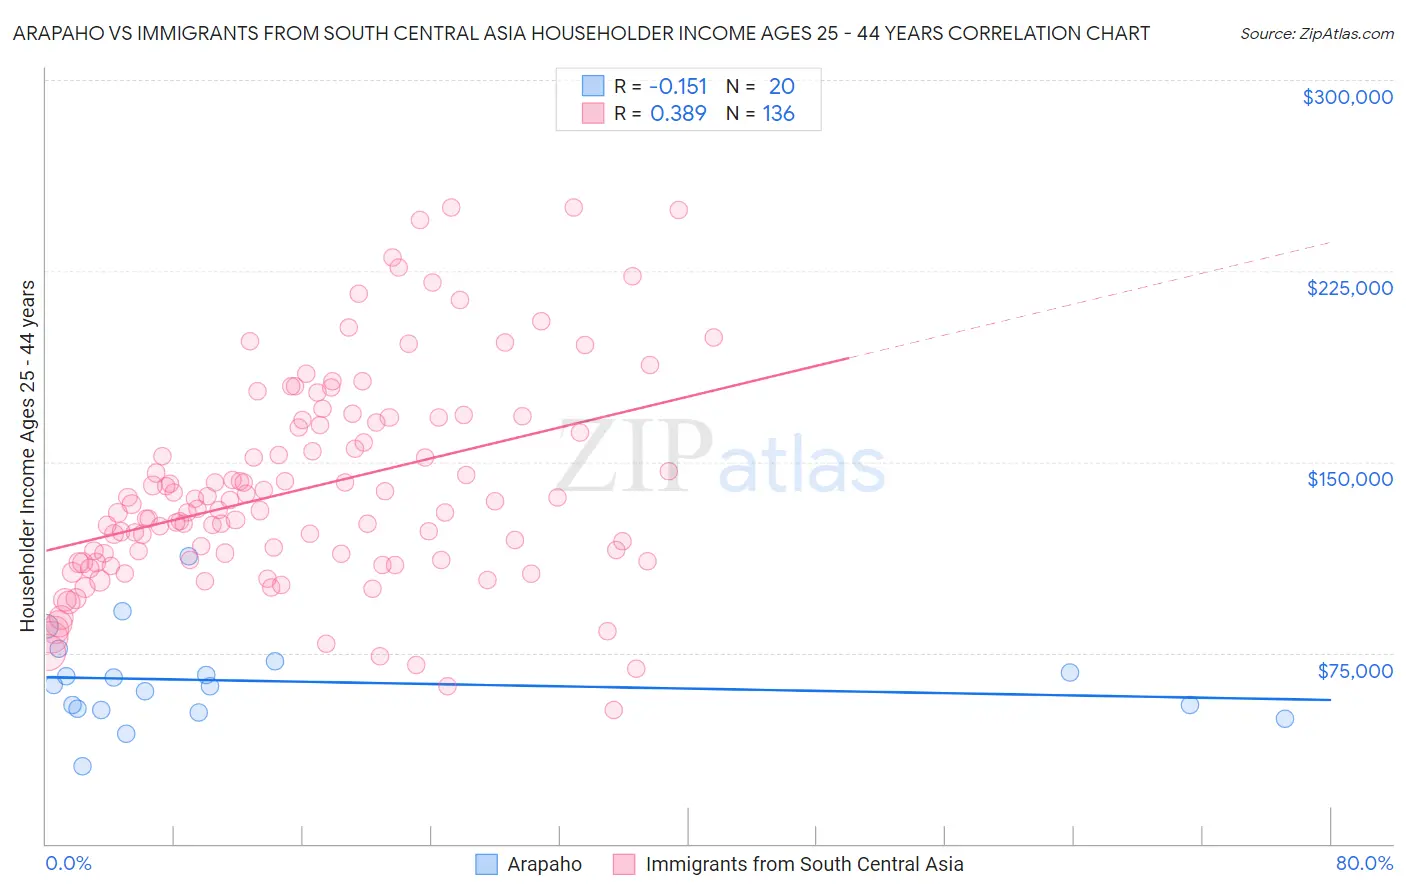 Arapaho vs Immigrants from South Central Asia Householder Income Ages 25 - 44 years